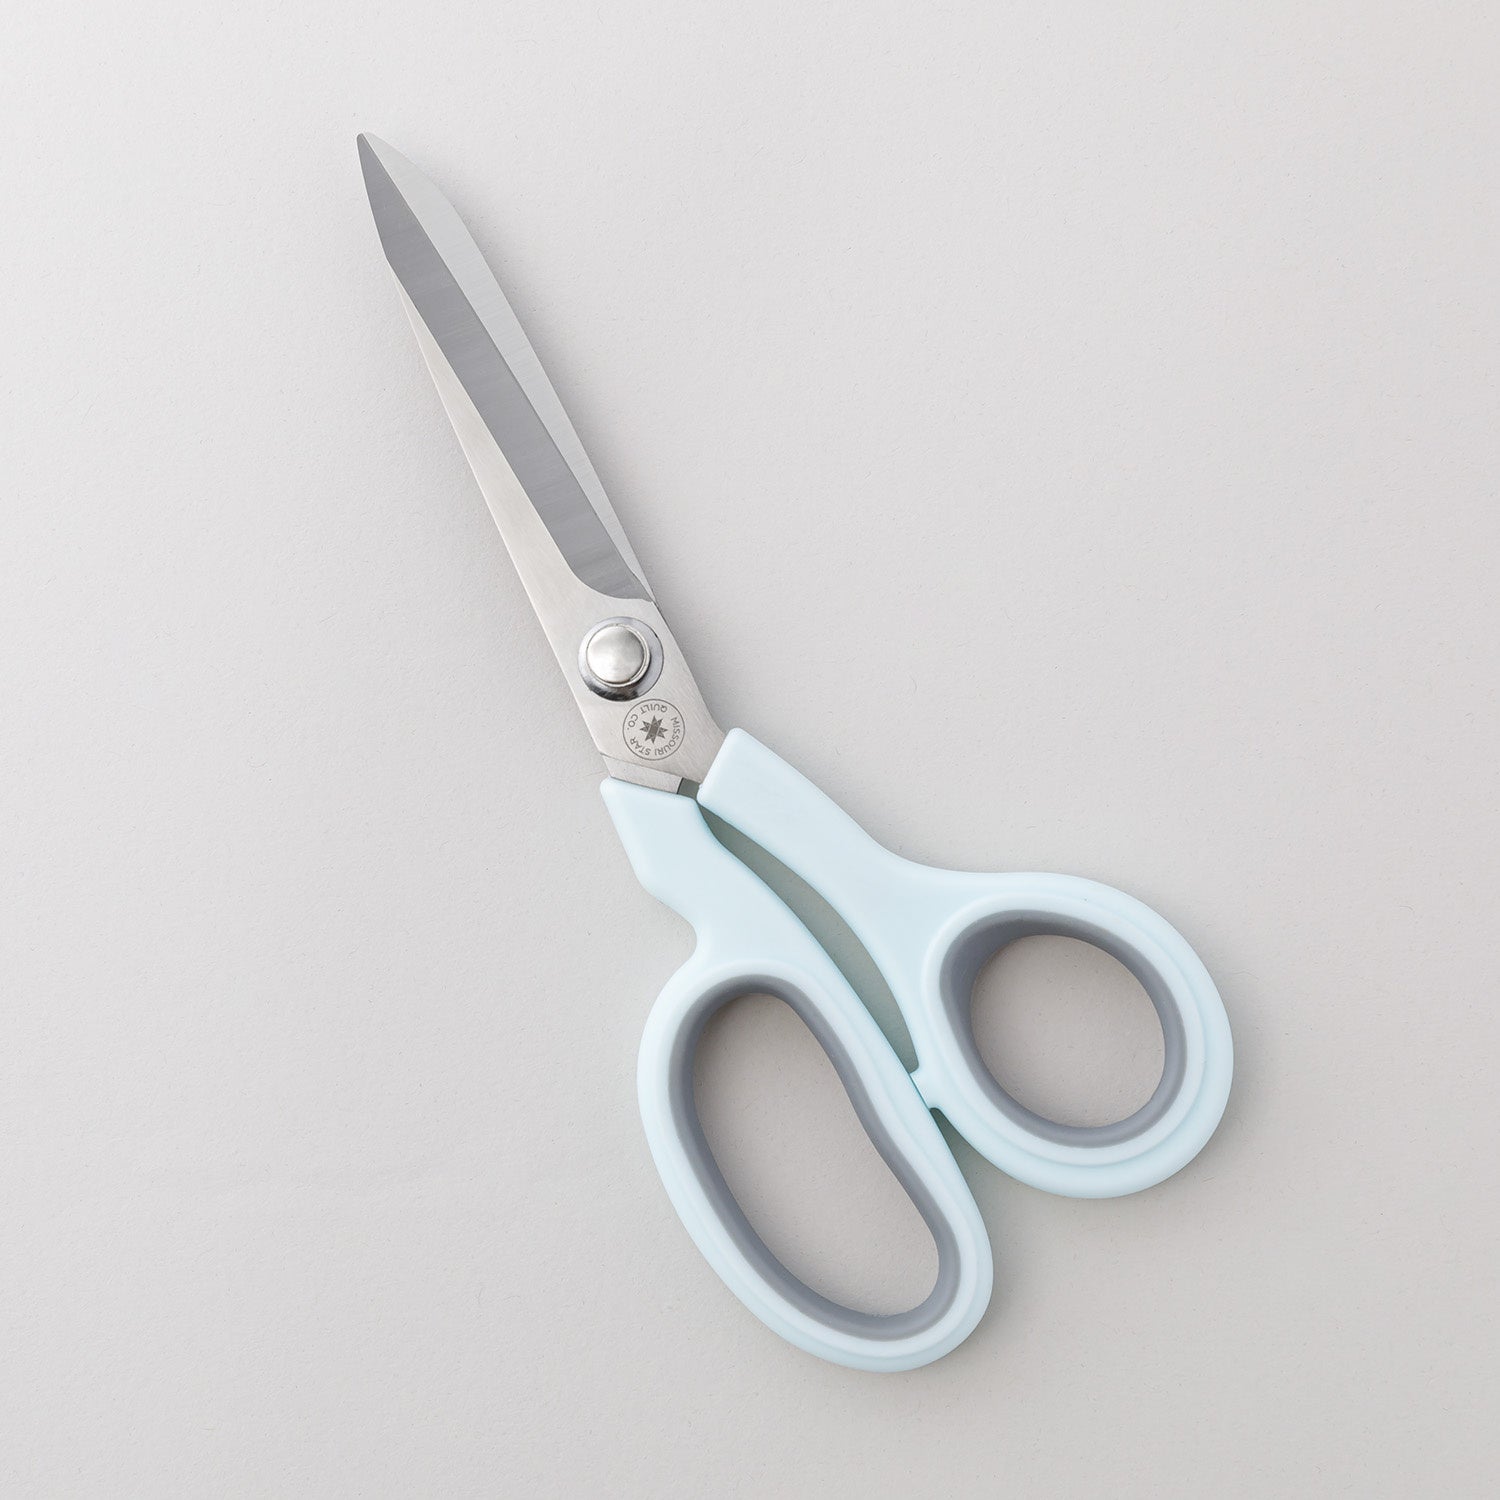 6 /8/5 Mini Small Scissors Stainless Steel - Tailoring Craft Sewing